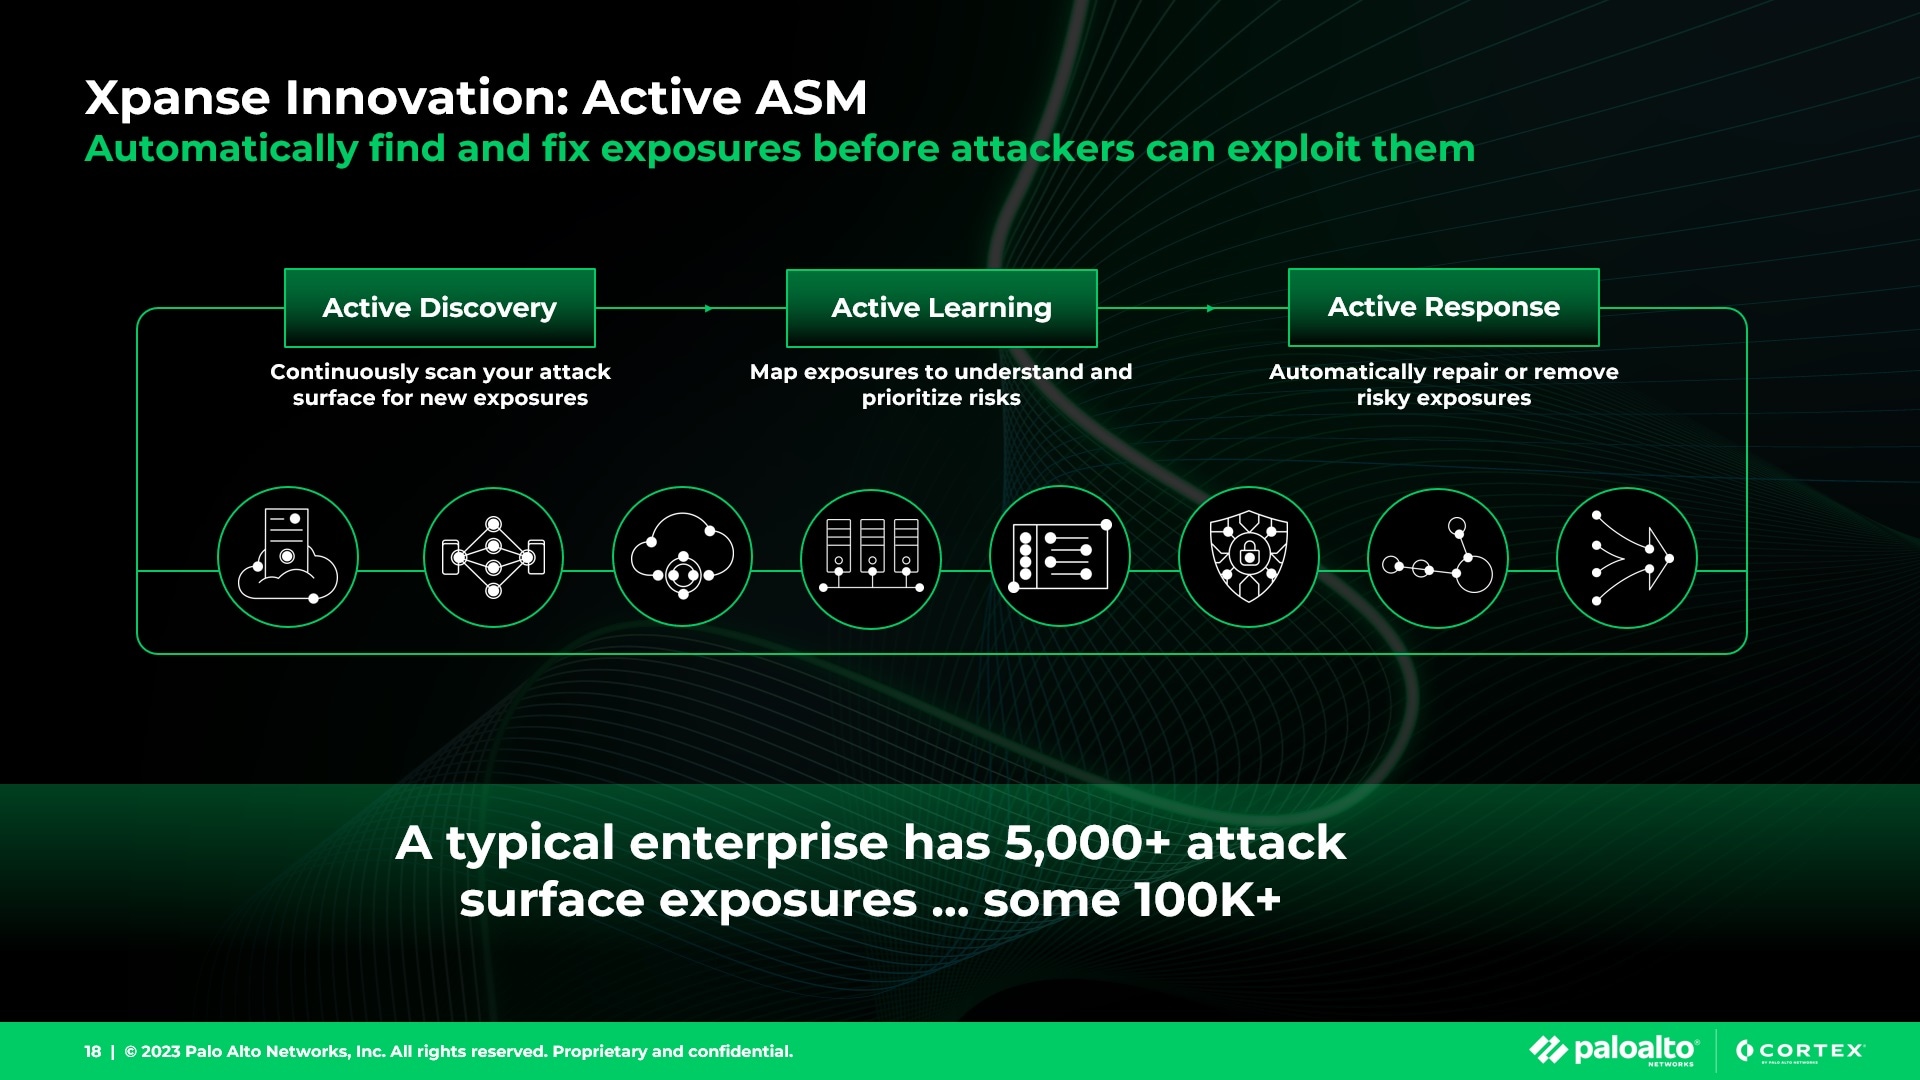 Xpanse Innovation: Active ASM - Automatically find and fix exposures before attackers can exploit them.